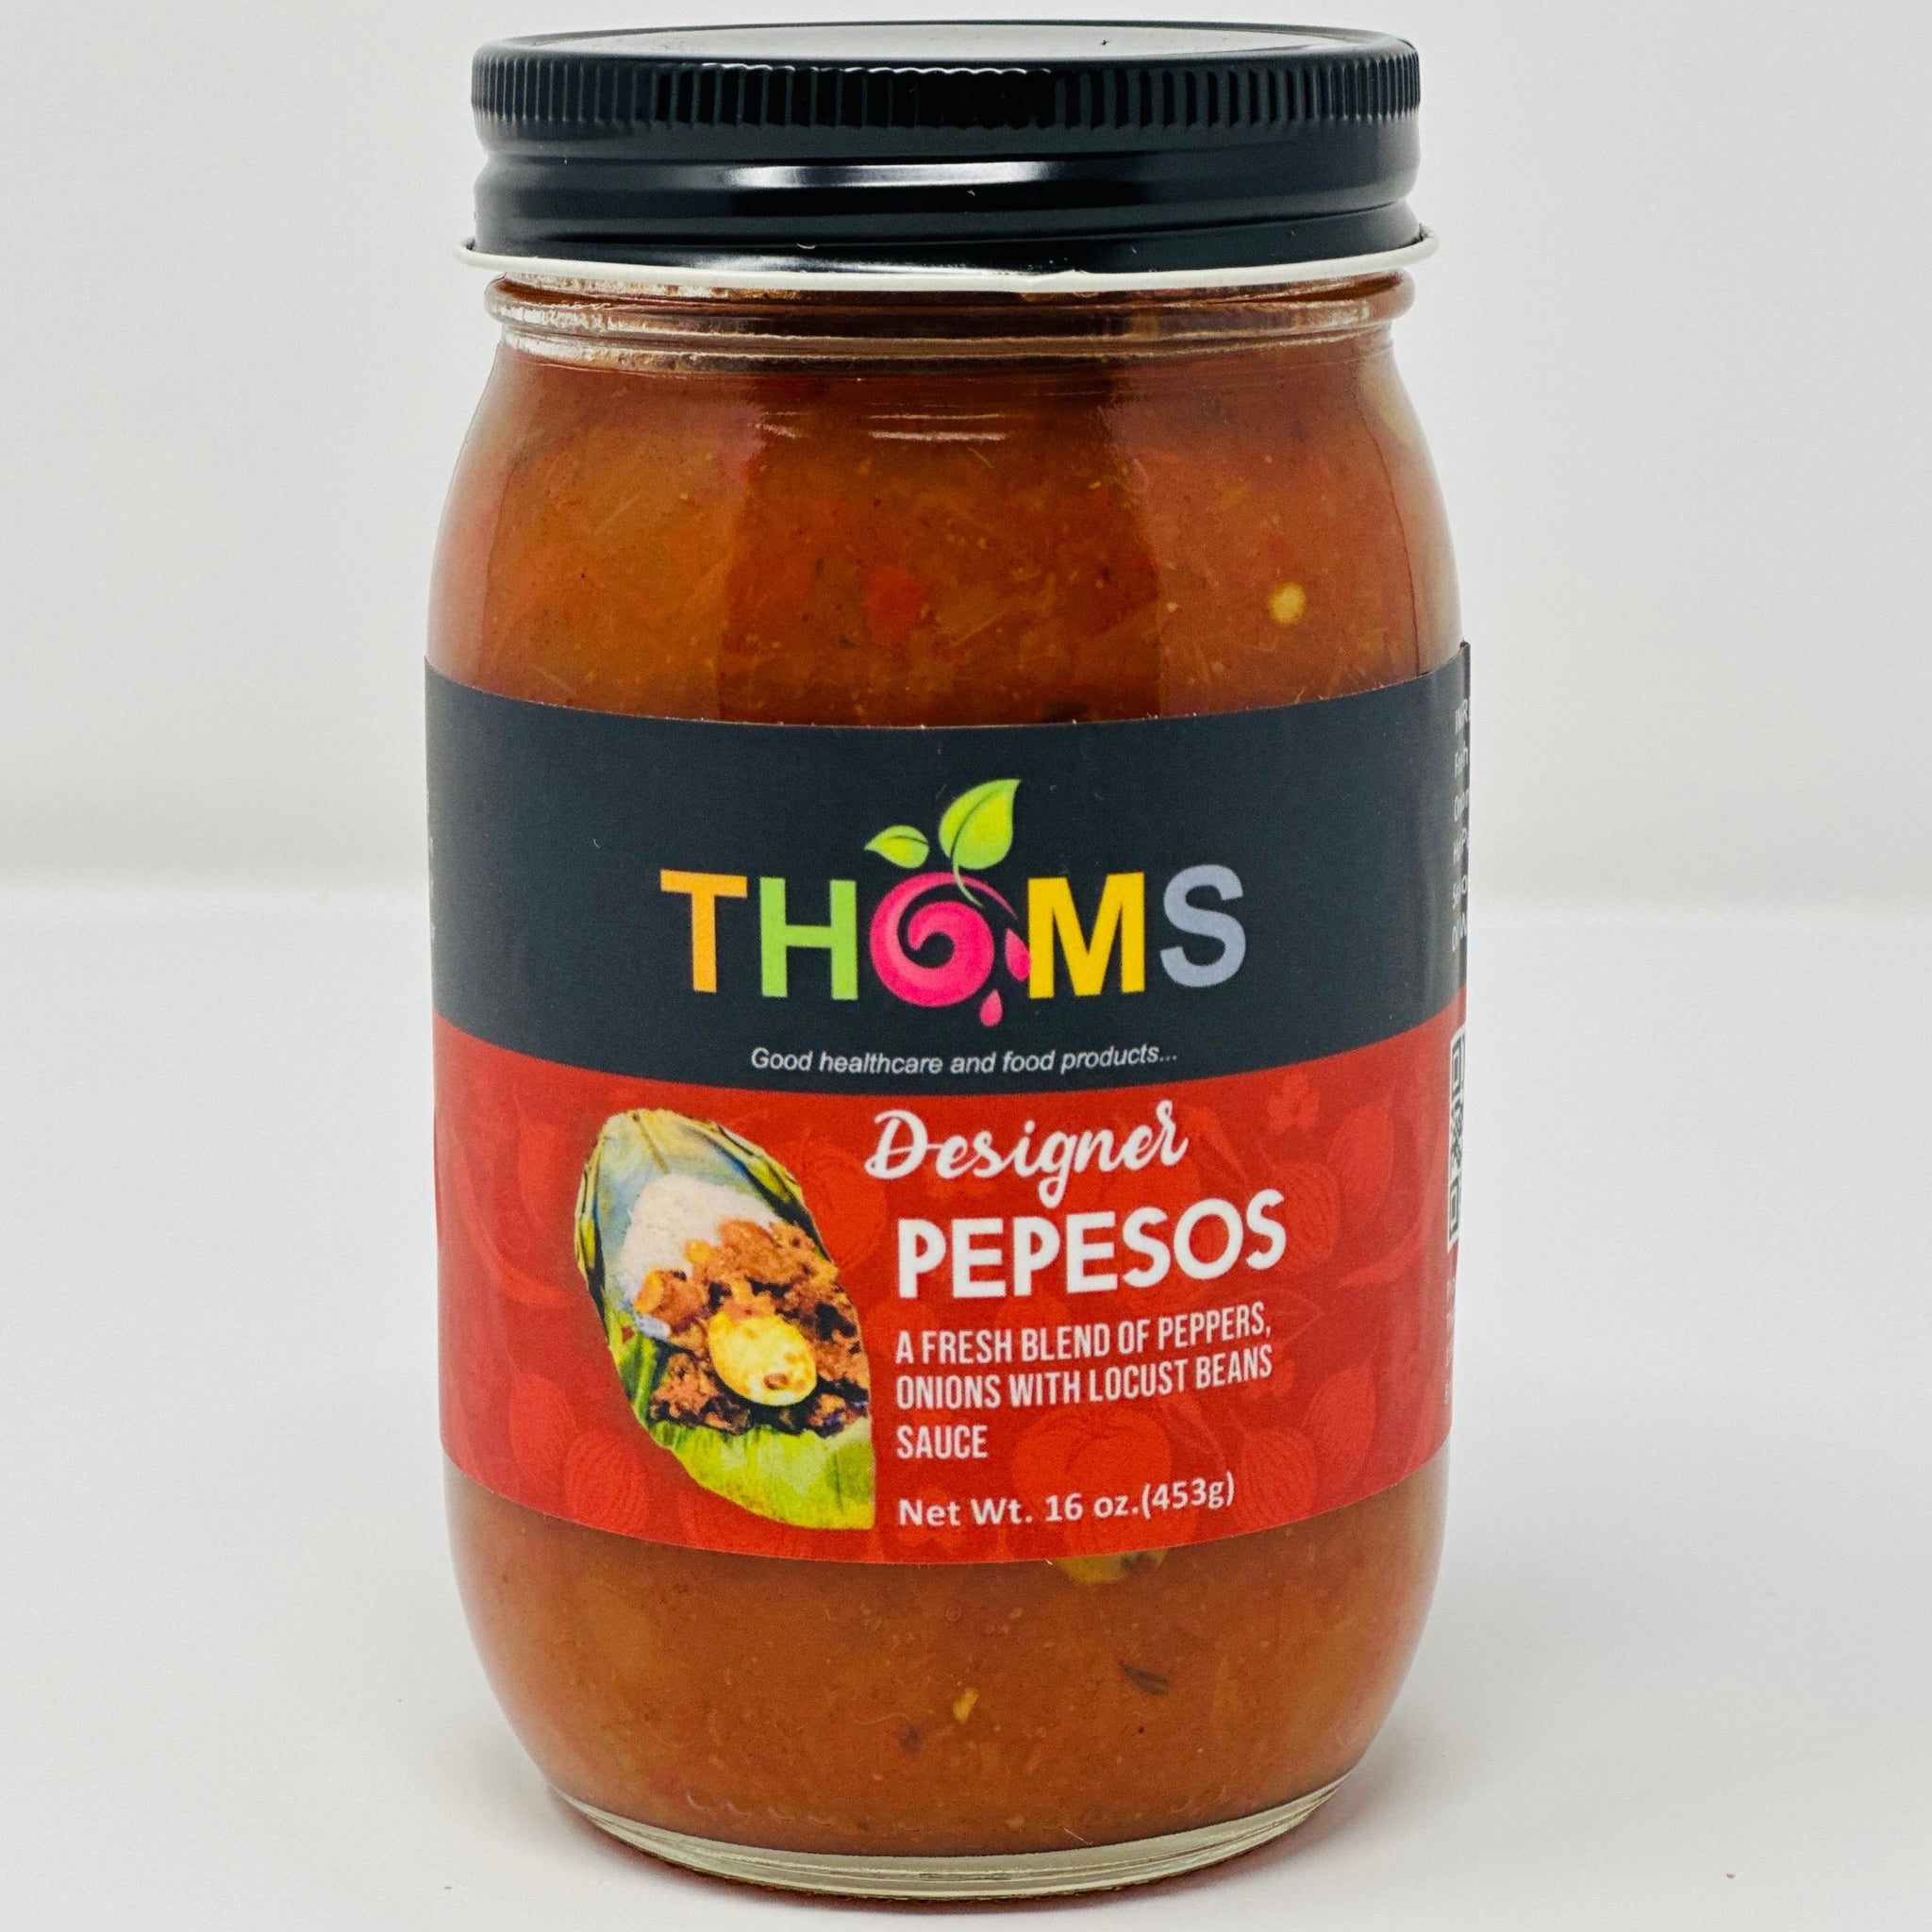 16OZ DESIGNER PEPESOS, For "RED OFADA" stew! a fresh blend of RED peppers with aromatic locust bean flavor!